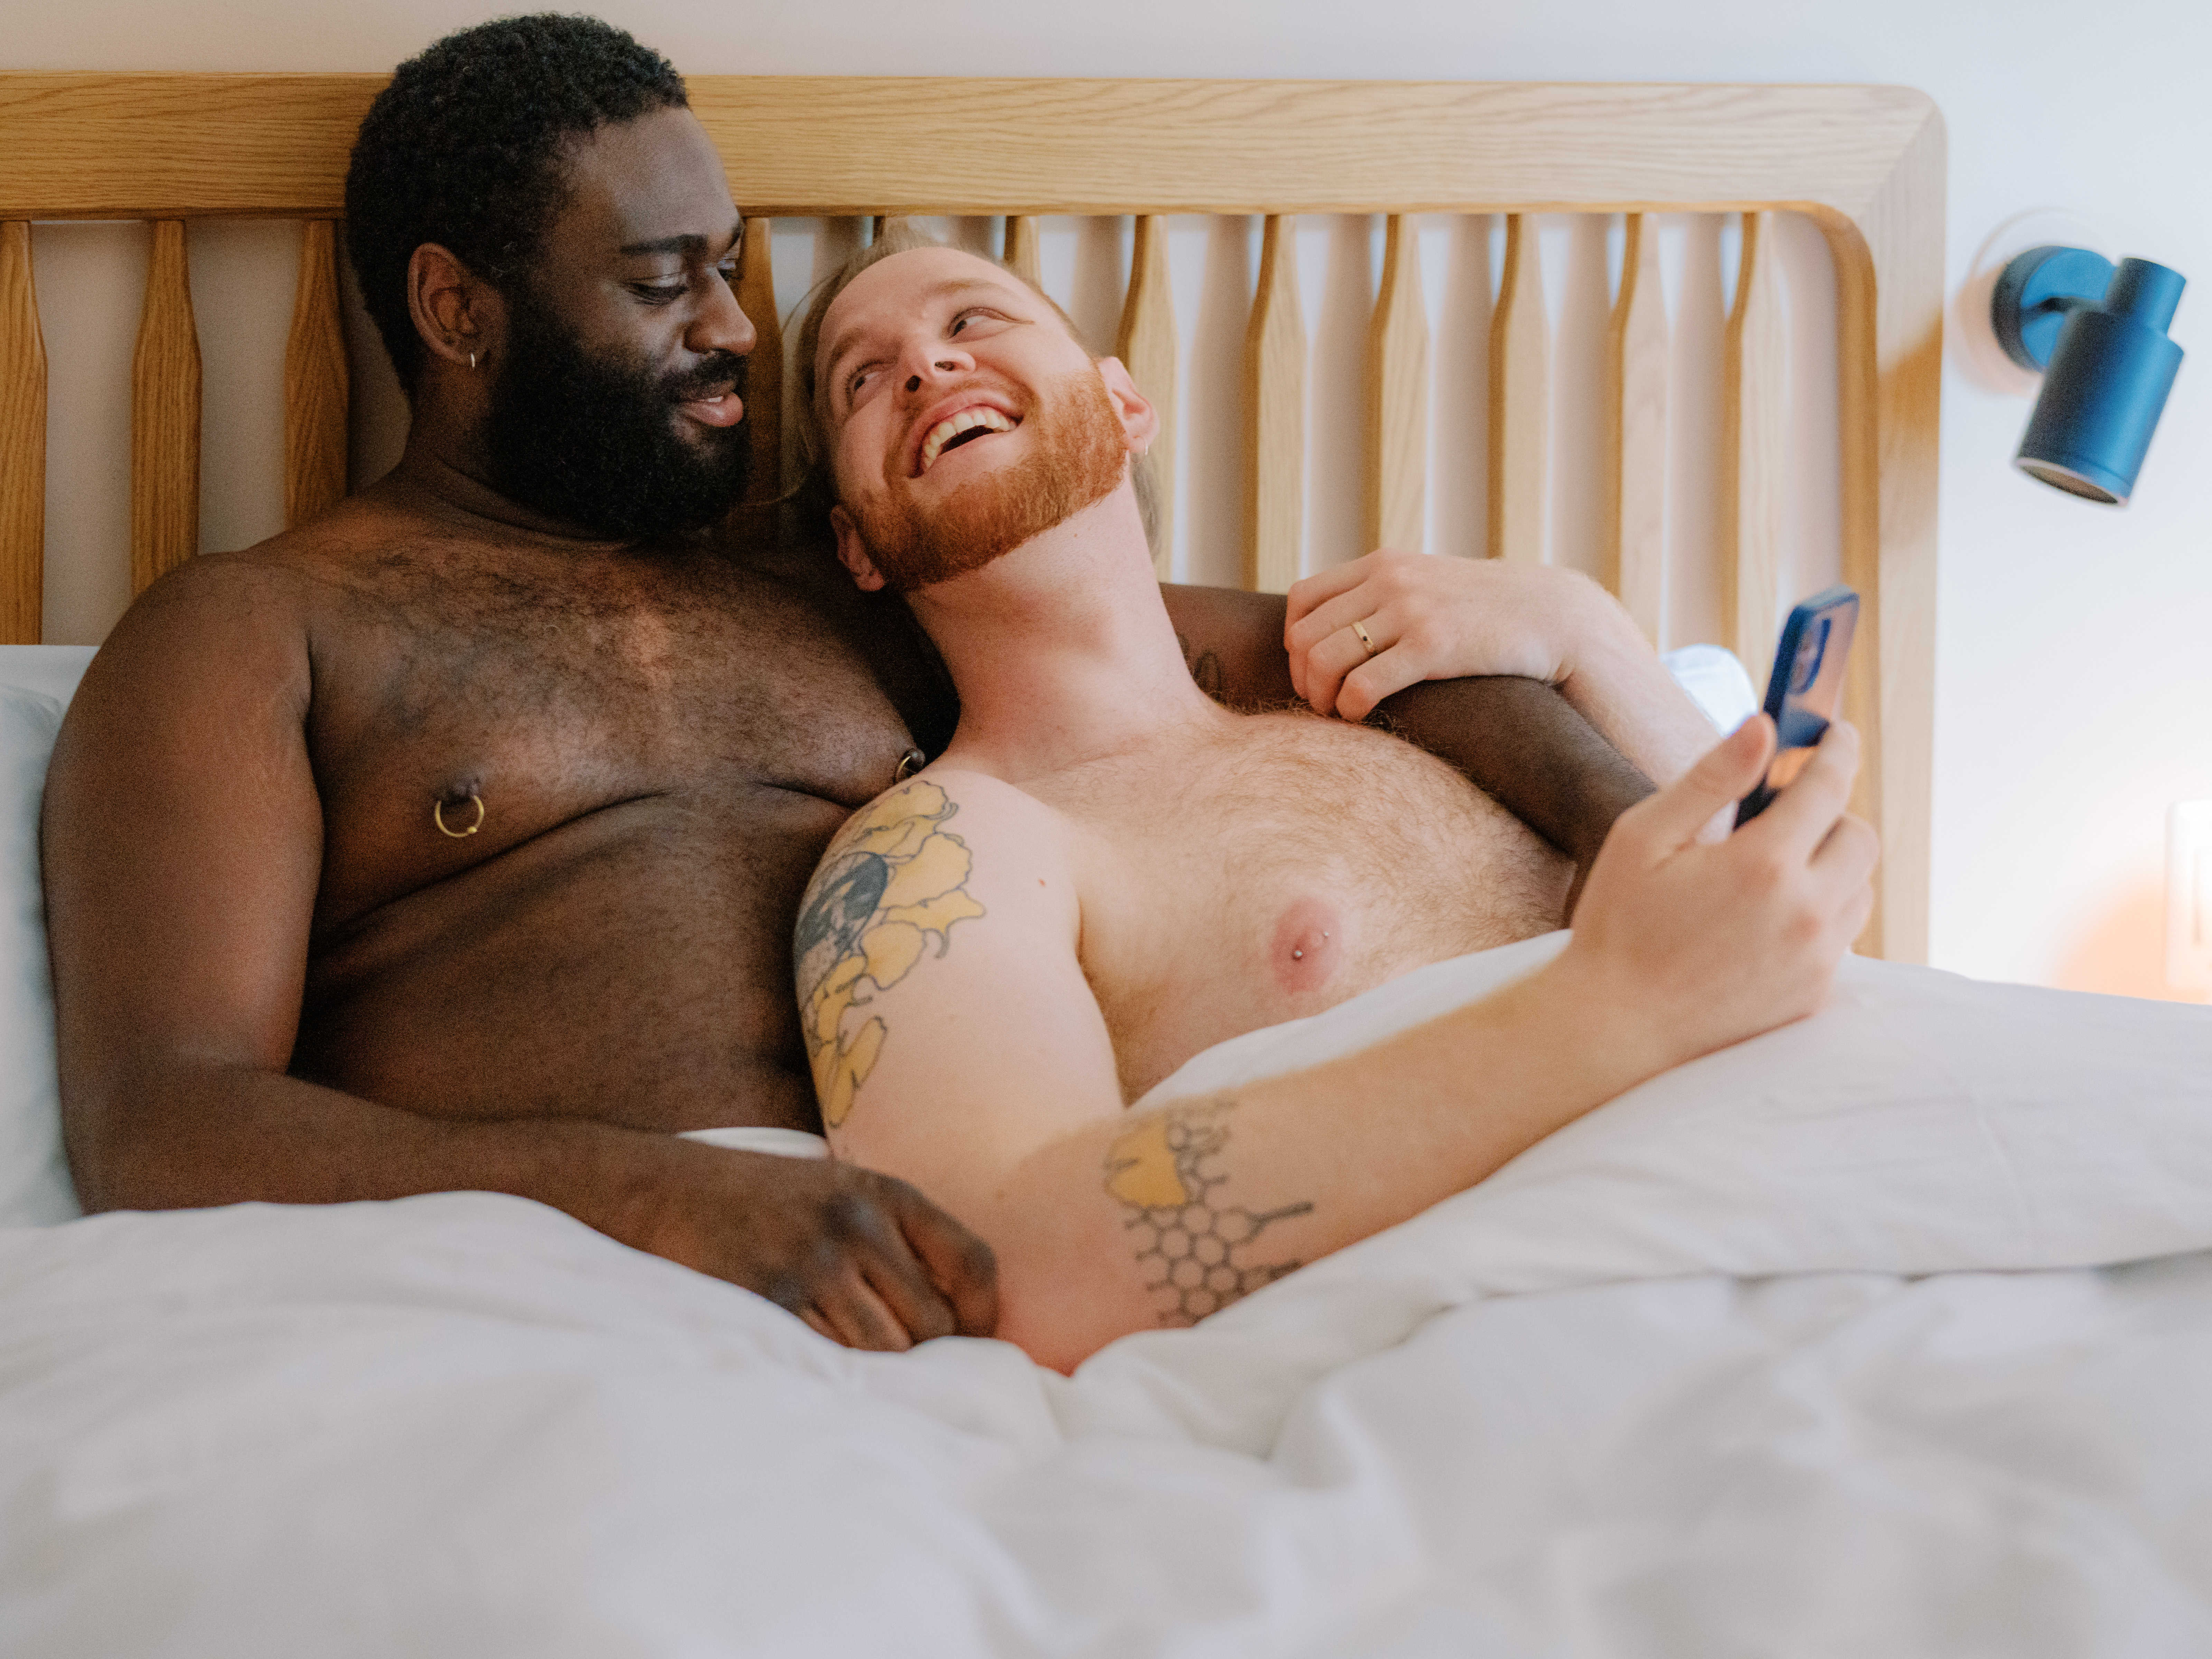 A queer couple uses a phone in bed together.